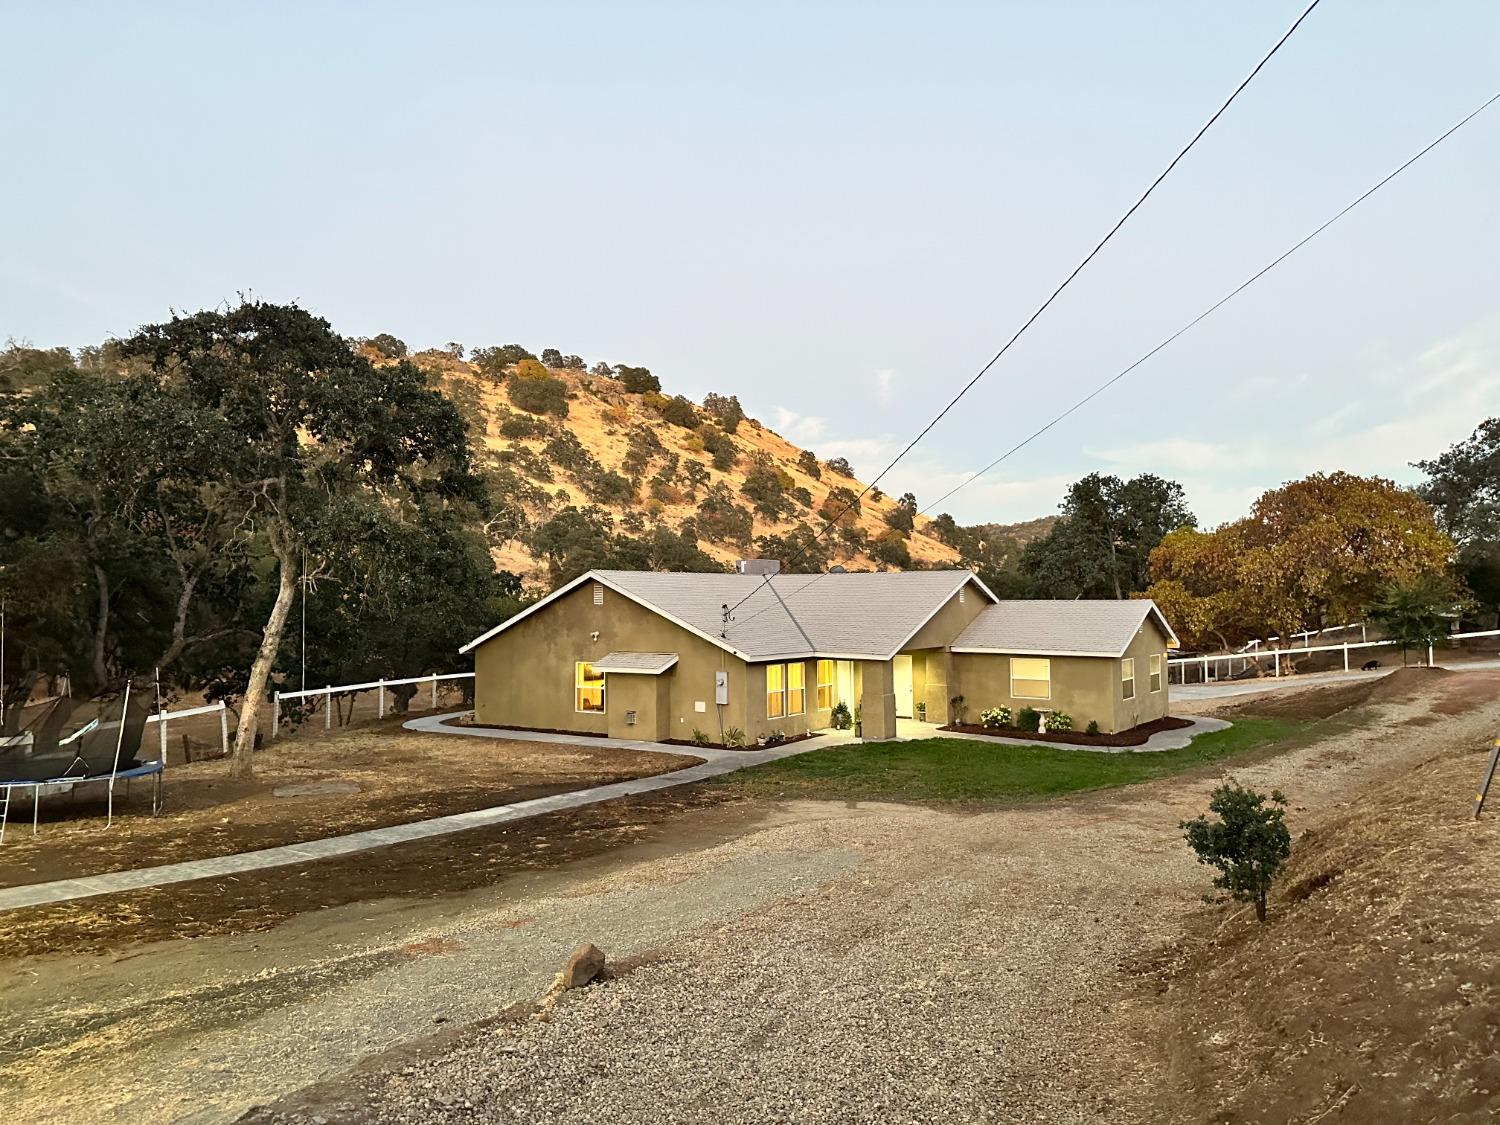 Photo of 46719 Creekside Rd in Squaw Valley, CA